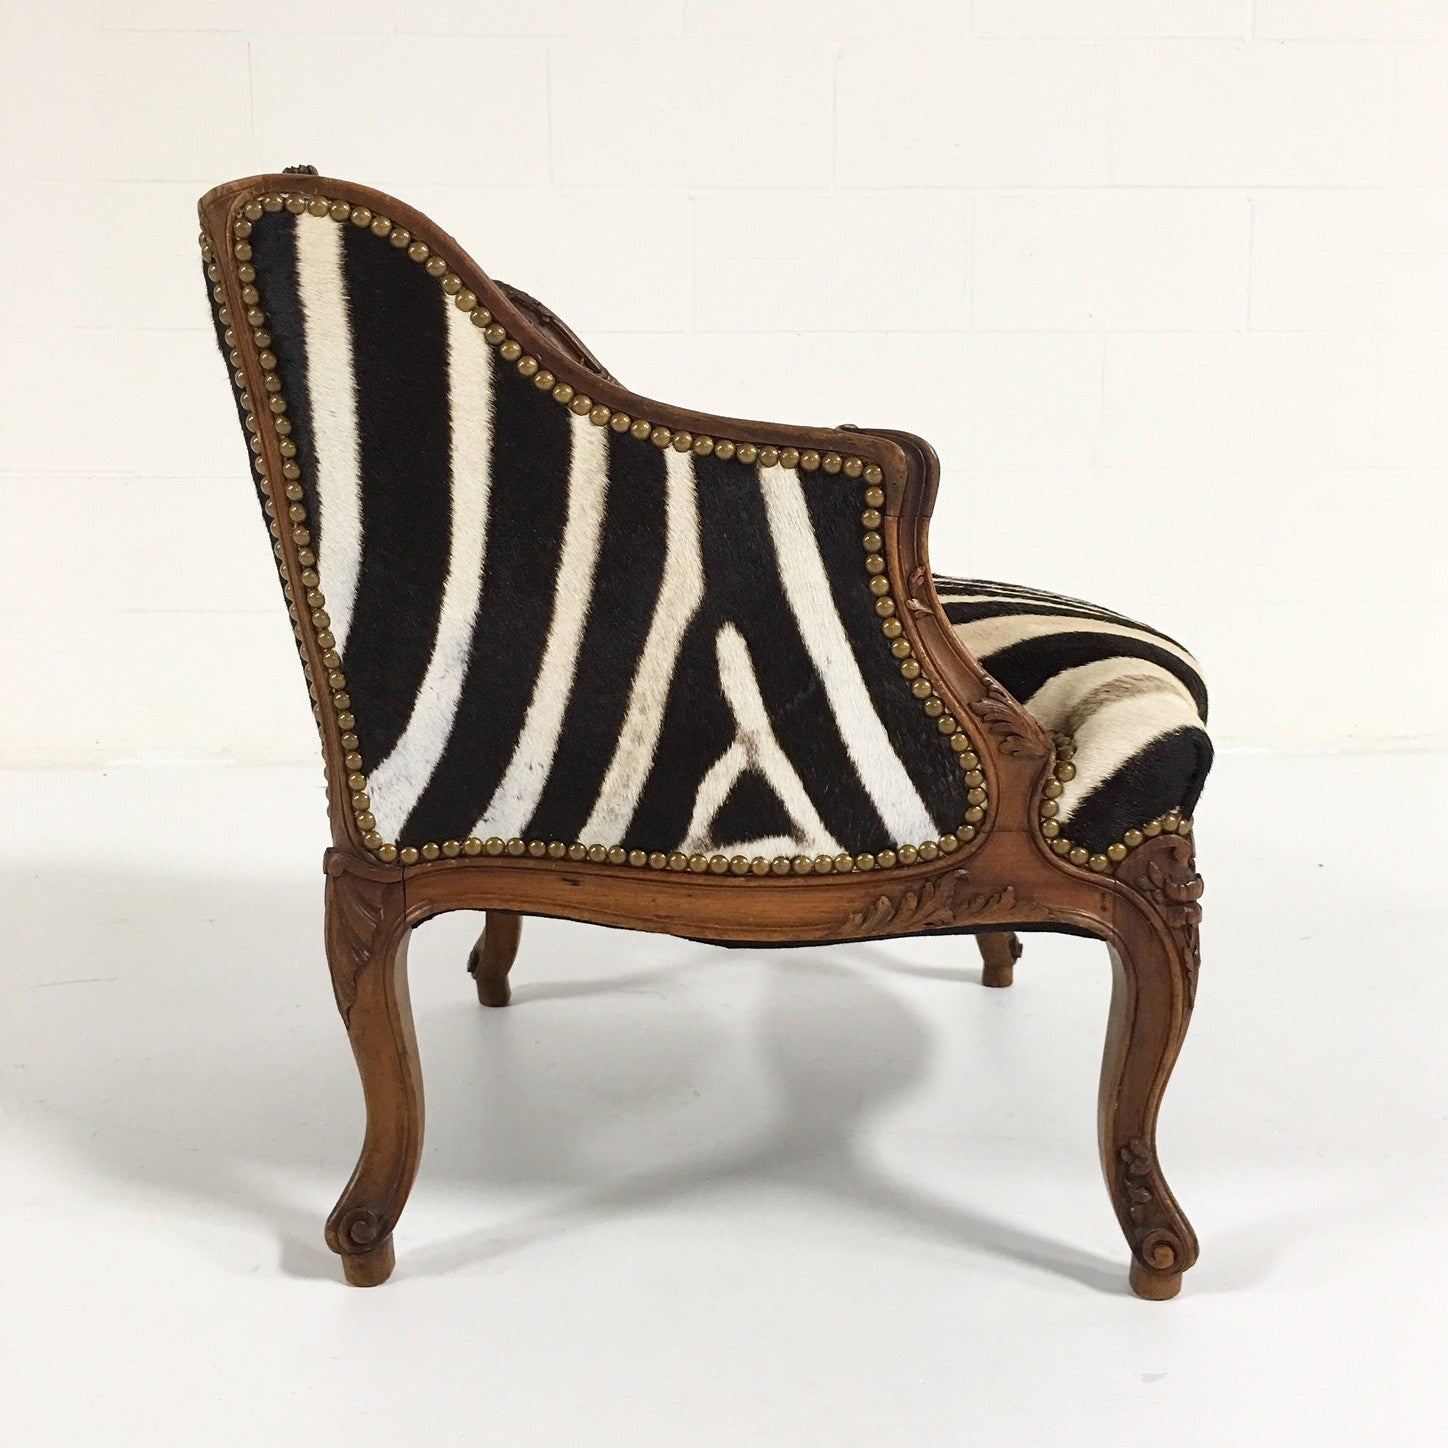 Small Antique Chair in Zebra Hide - FORSYTH